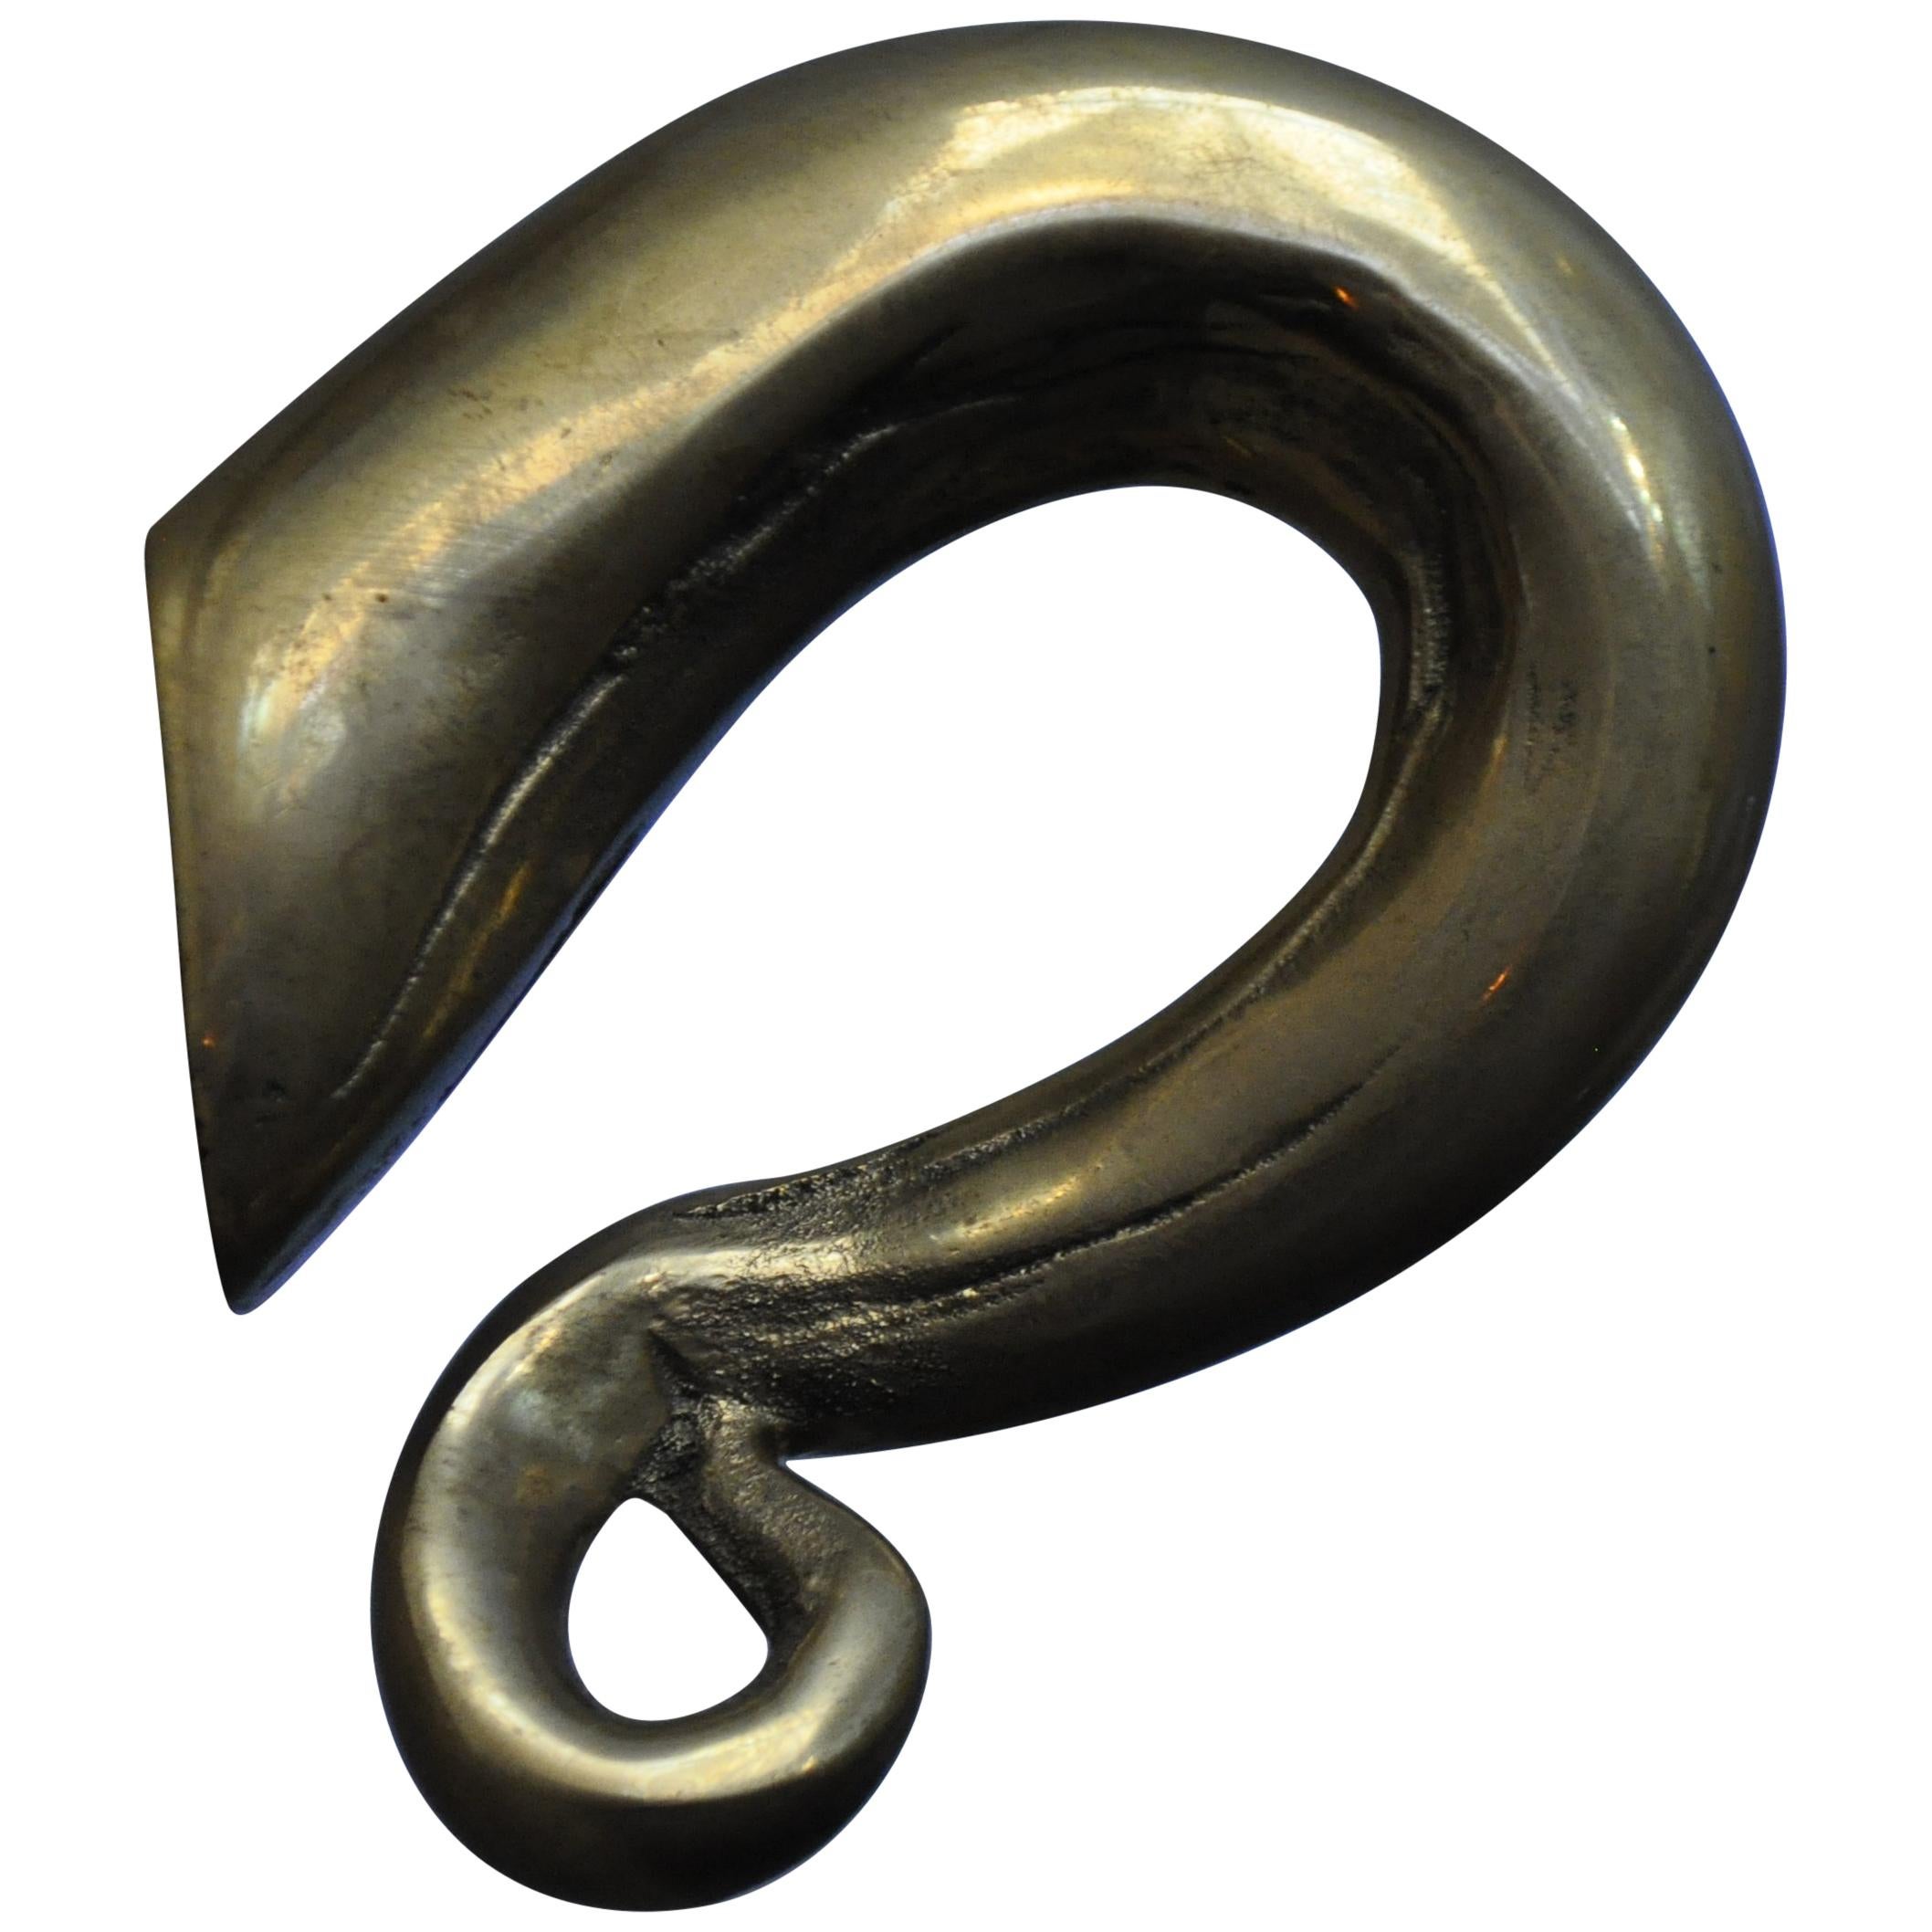 Contemporary Sculptural Bronze Handle 'Kinoko' Cast in French Sand Molds For Sale